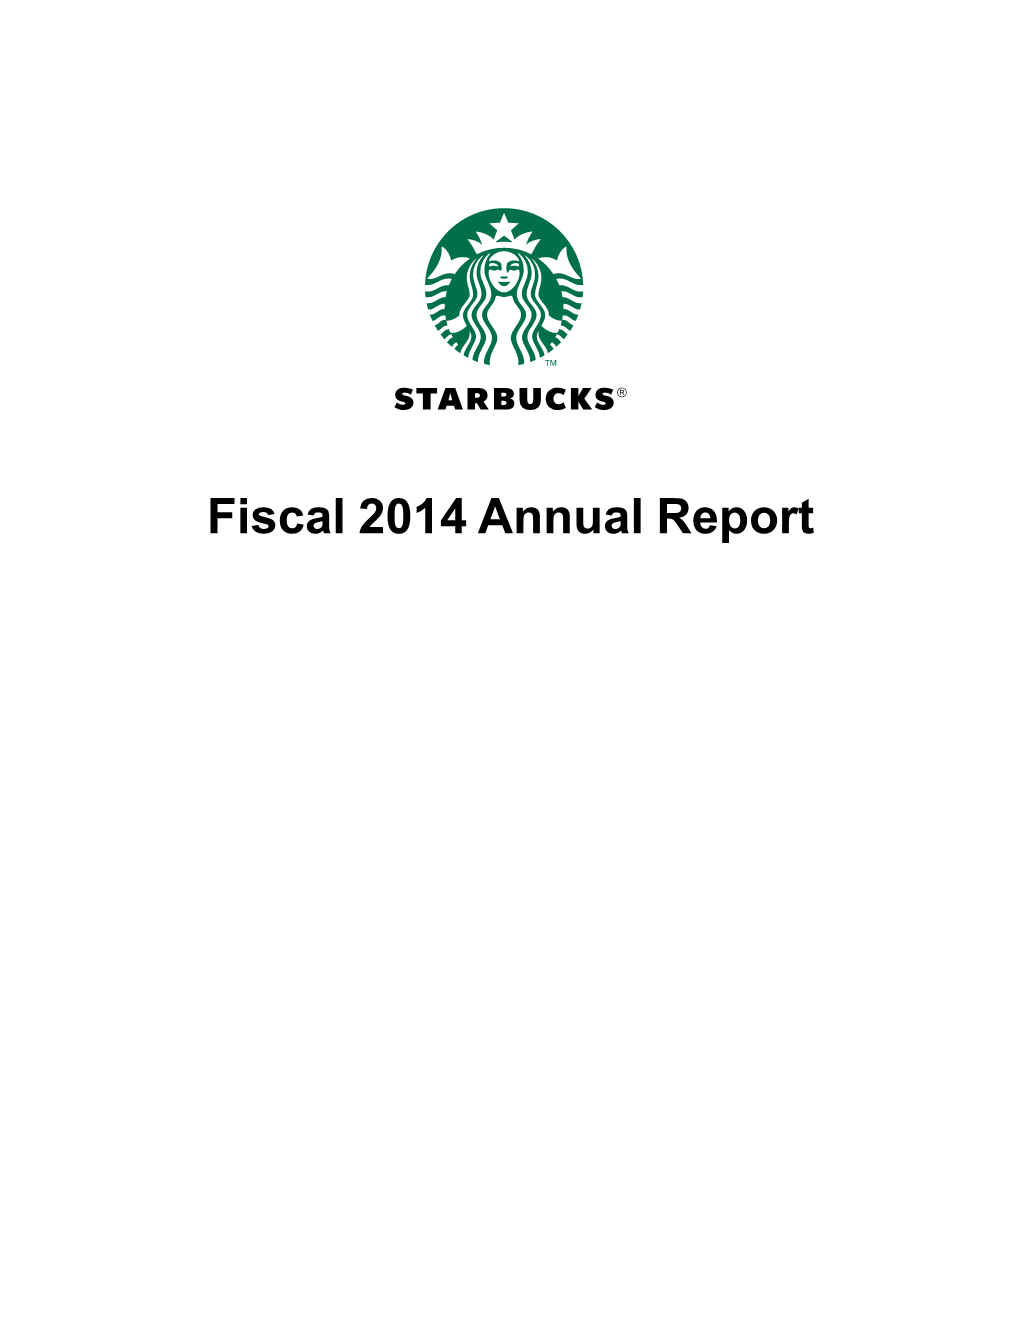 Fiscal 2014 Annual Report